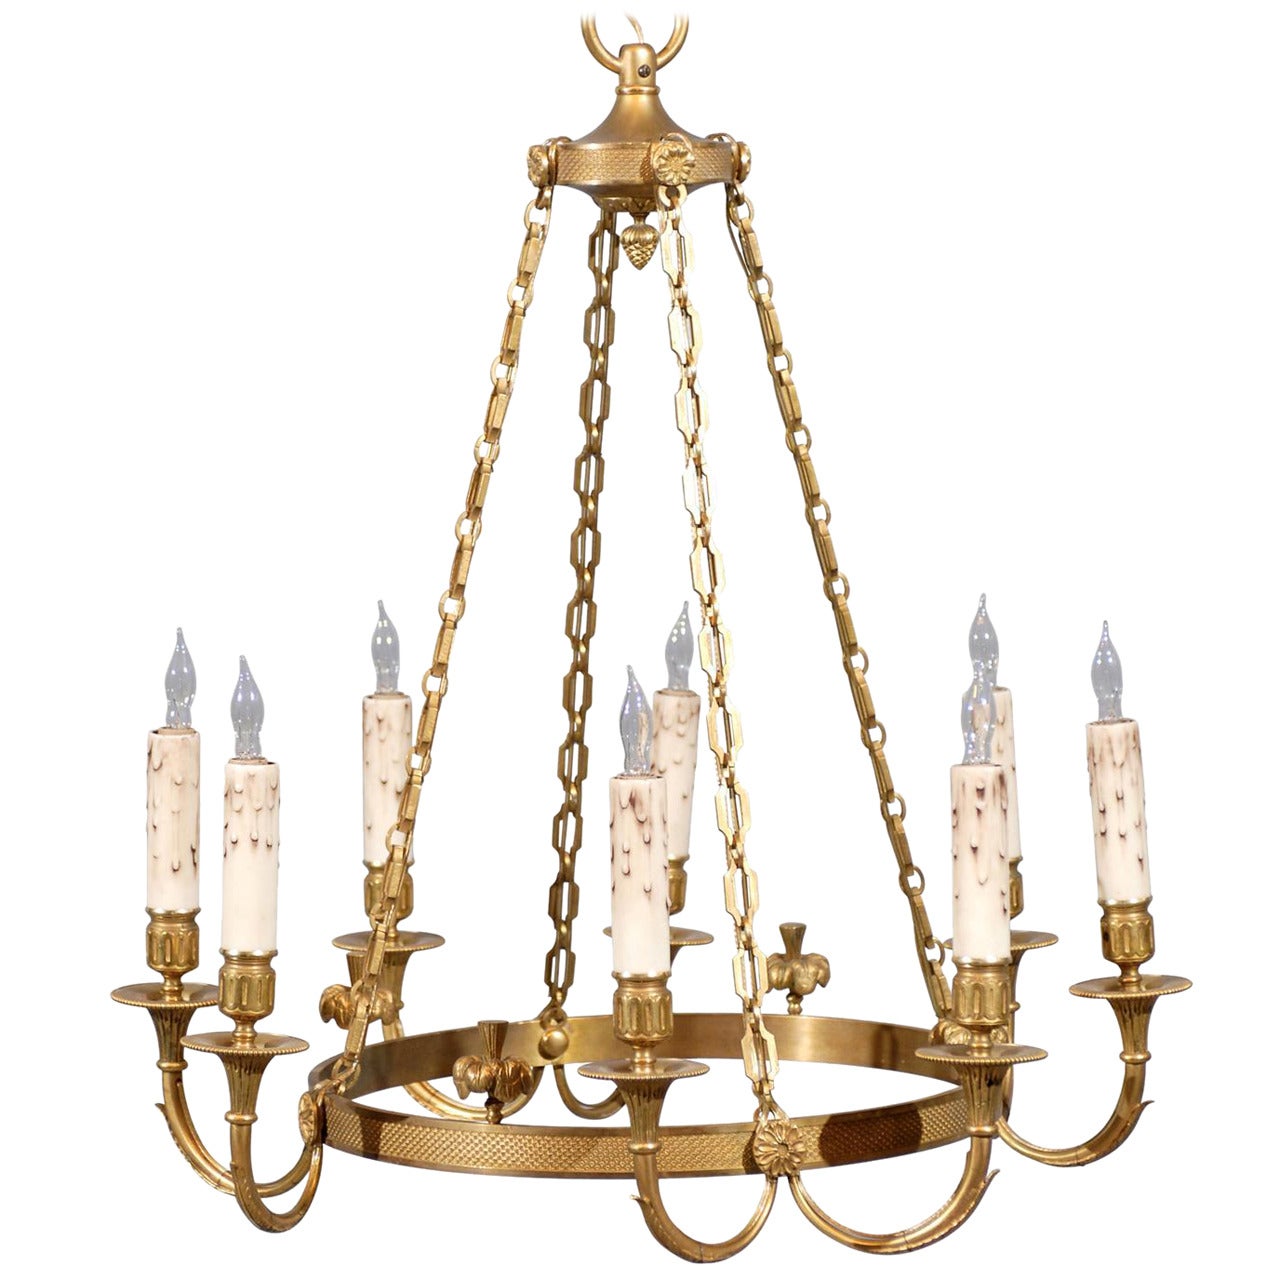 Neoclassical Style French Round Bronze Doré Six-Light Chandelier, 20th Century